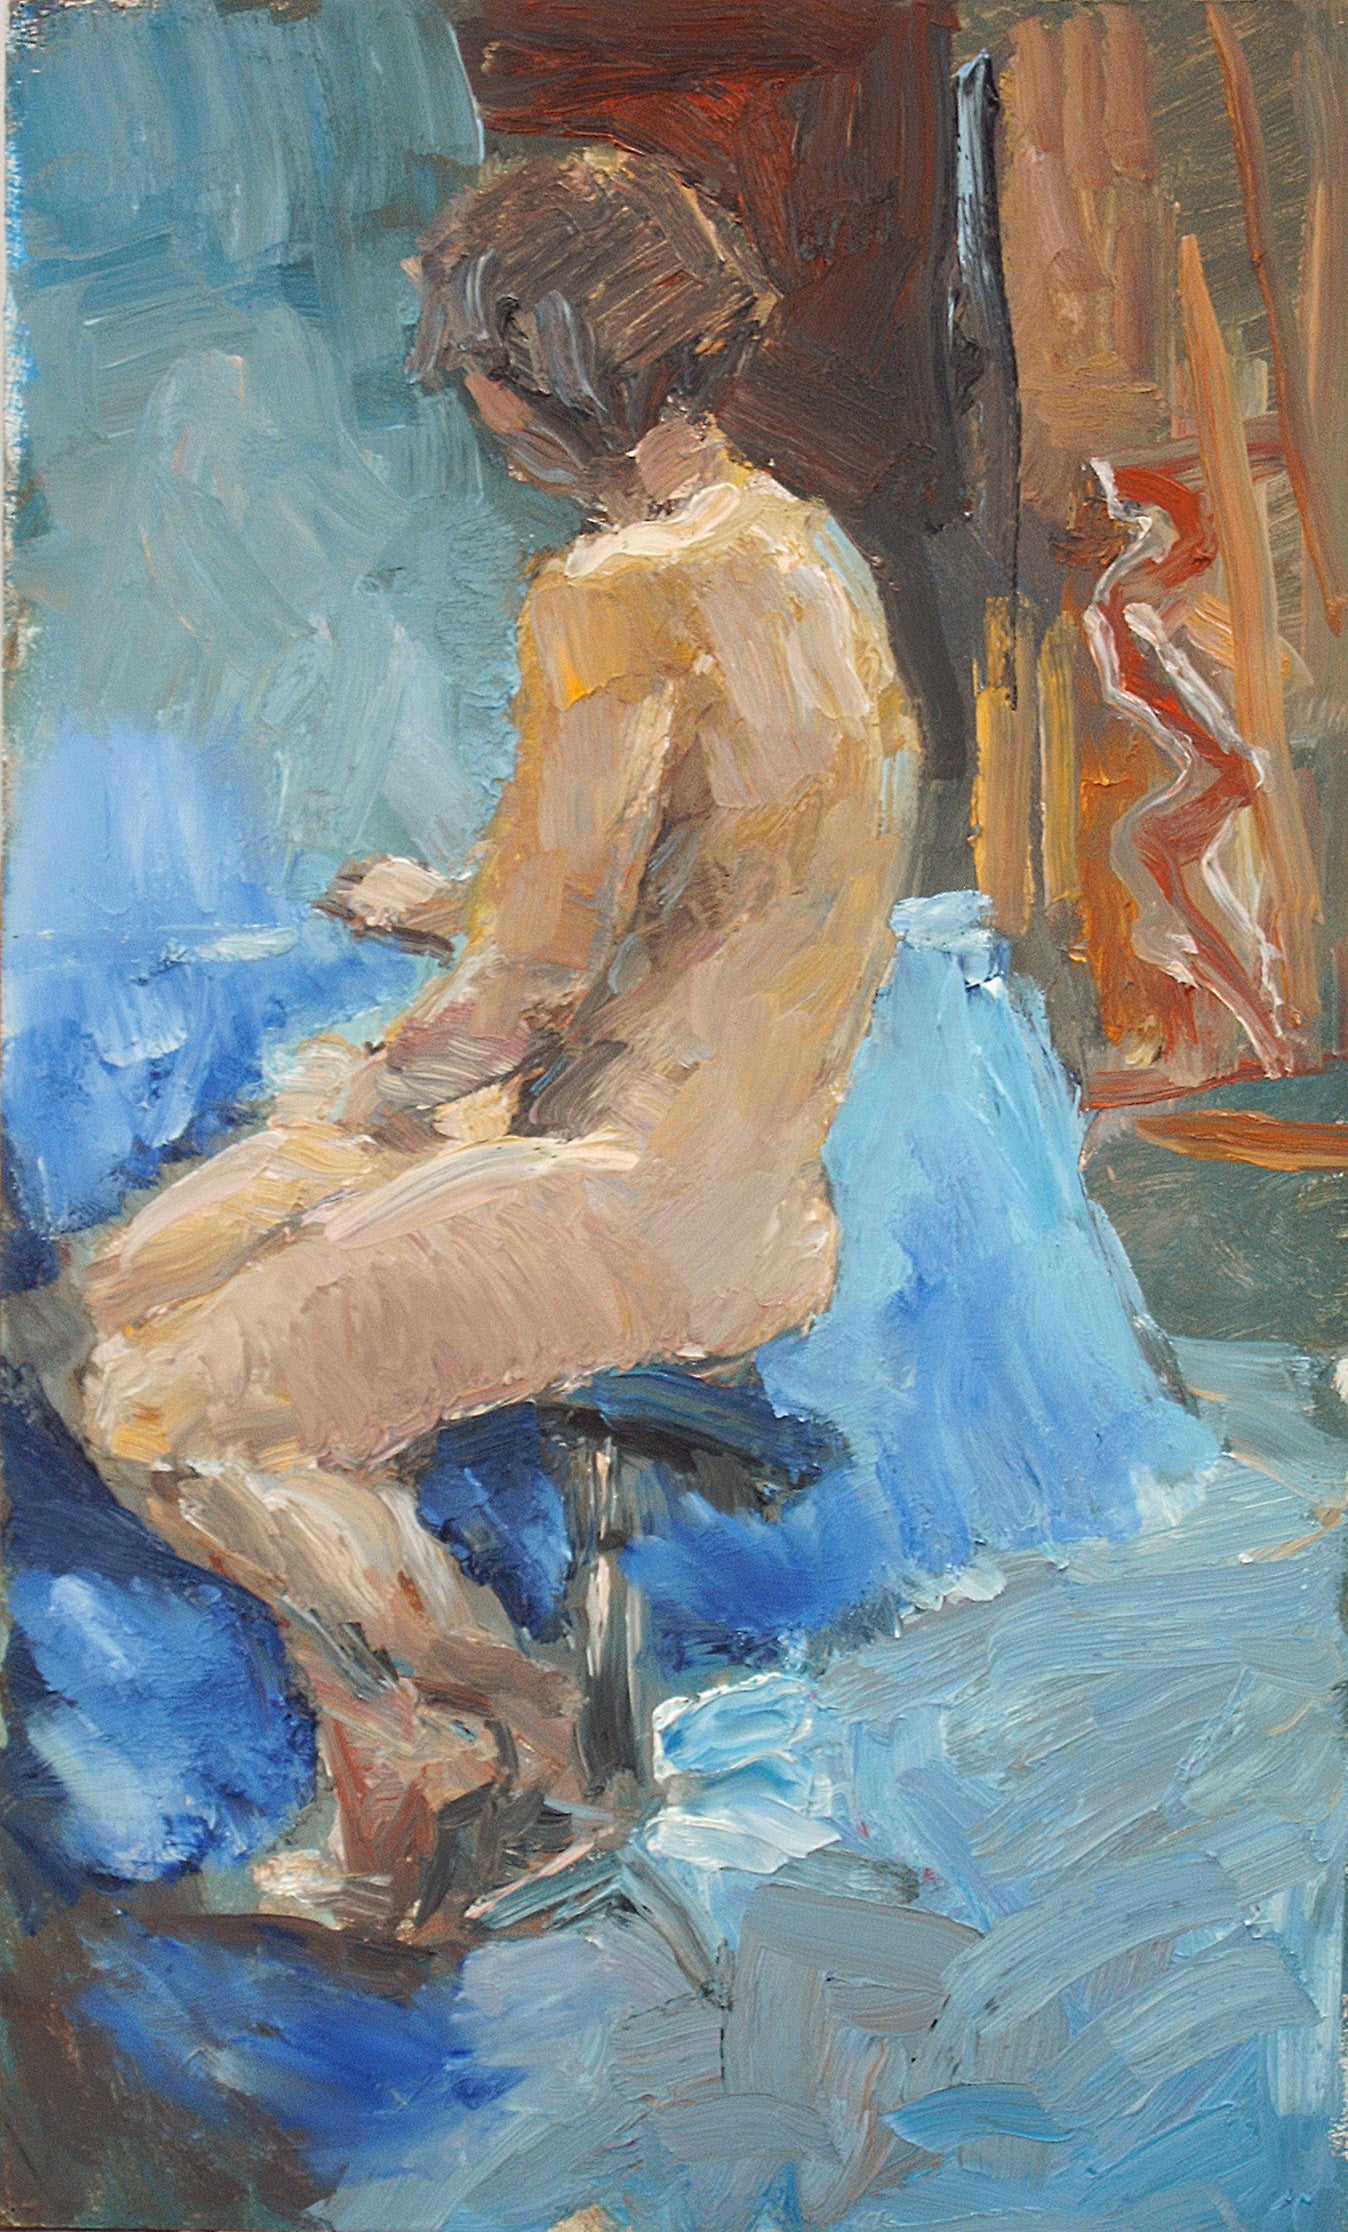 ‘Figurestudy with blue interior’ oil on board 59x36cm